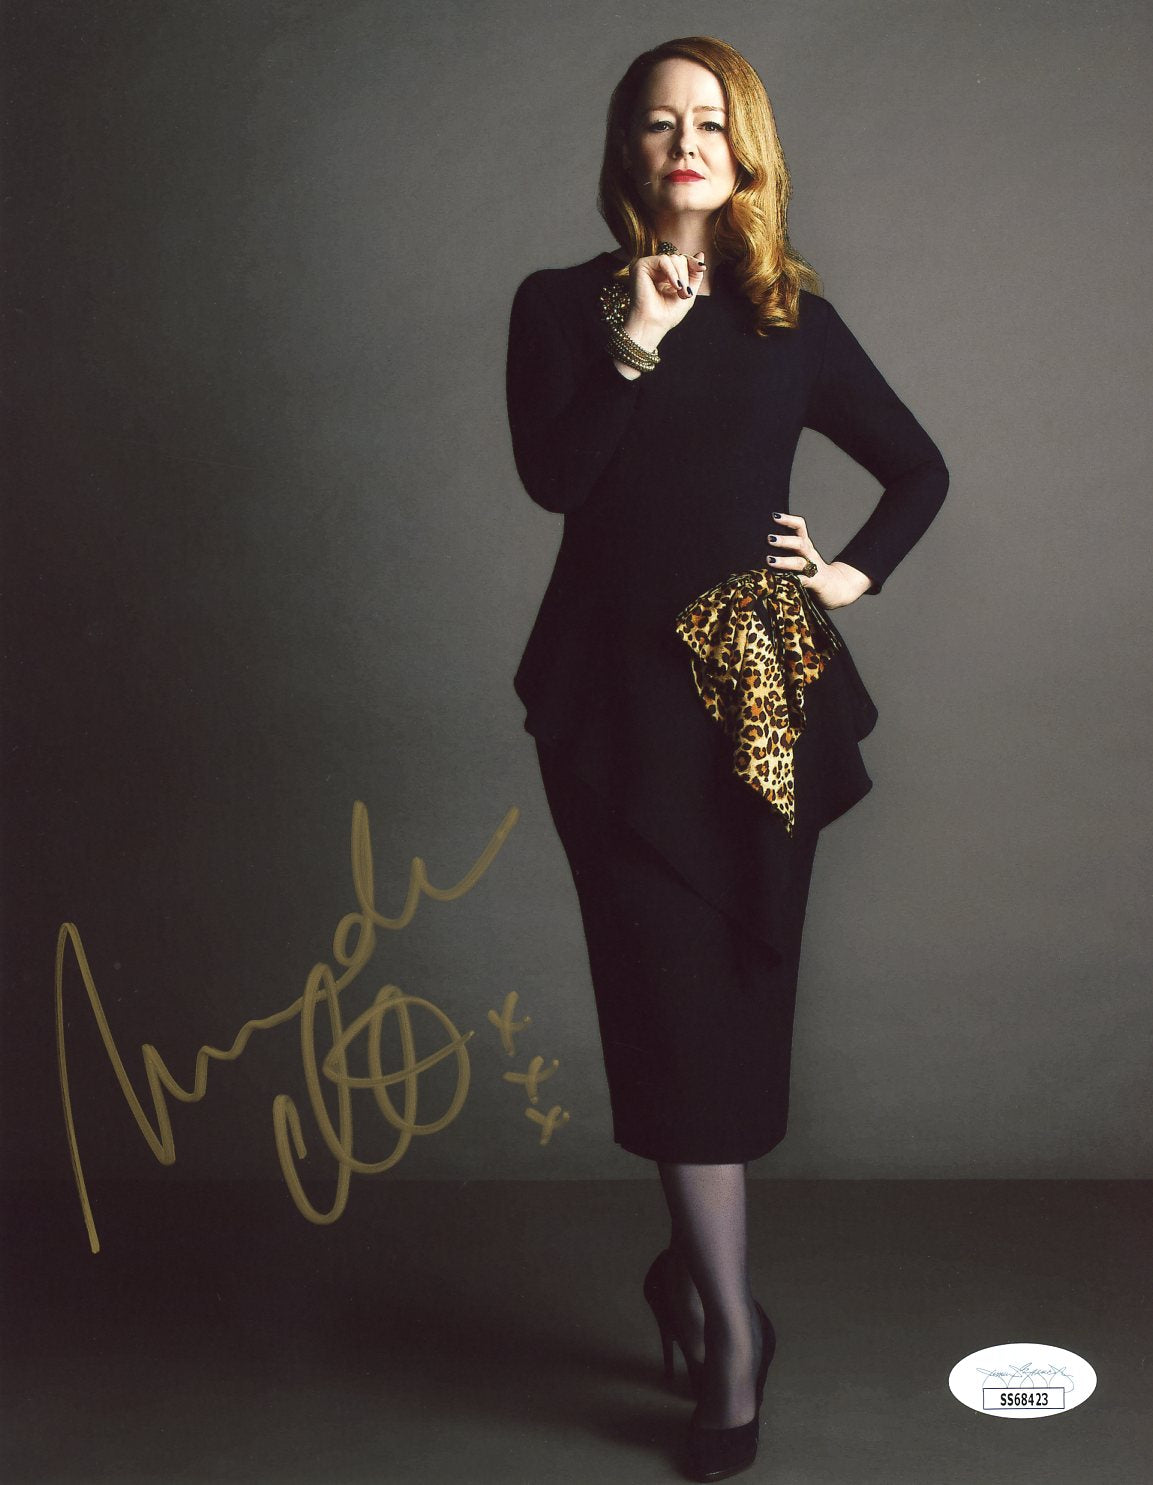 Miranda Otto The Chilling Adventures of Sabrina 8x10 Signed Photo JSA Certified Autograph